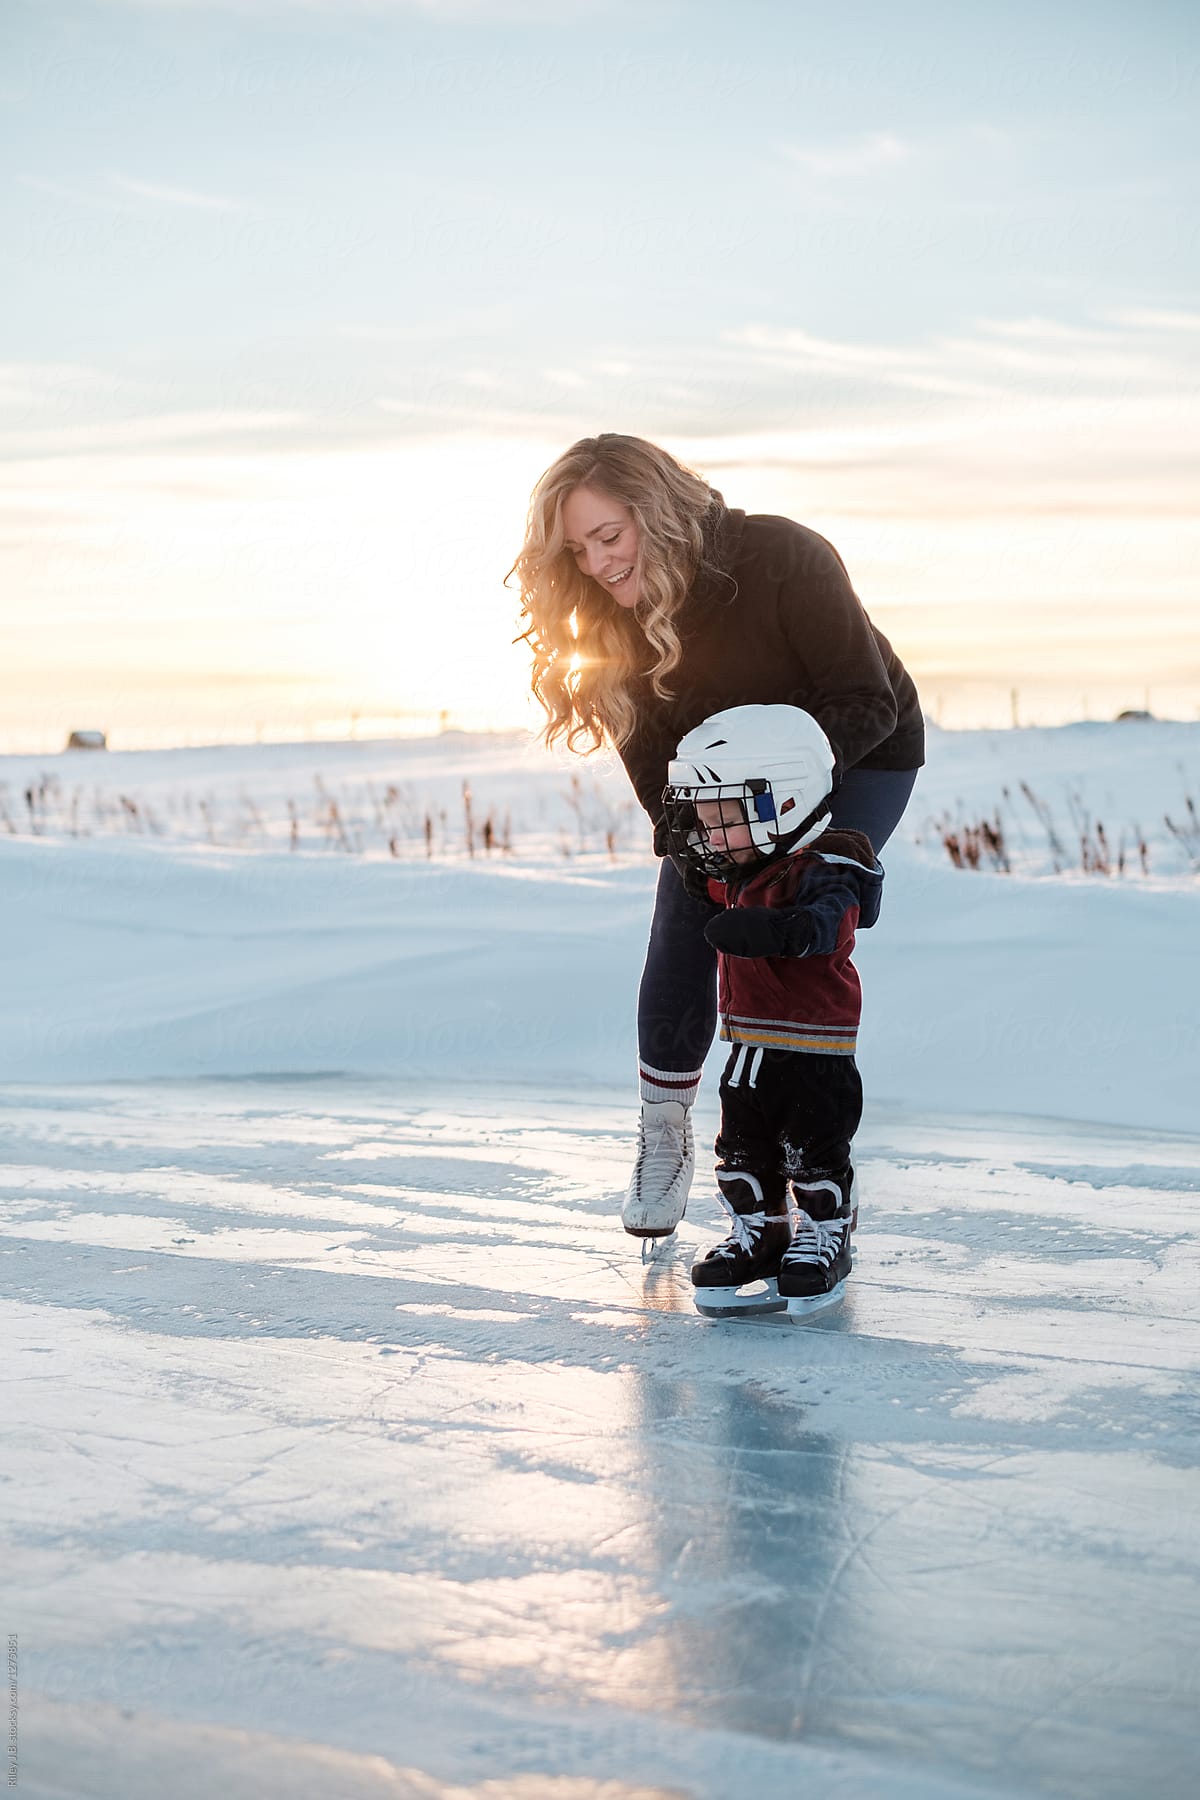 A pretty Mother helps her son skate on a frozen pond.